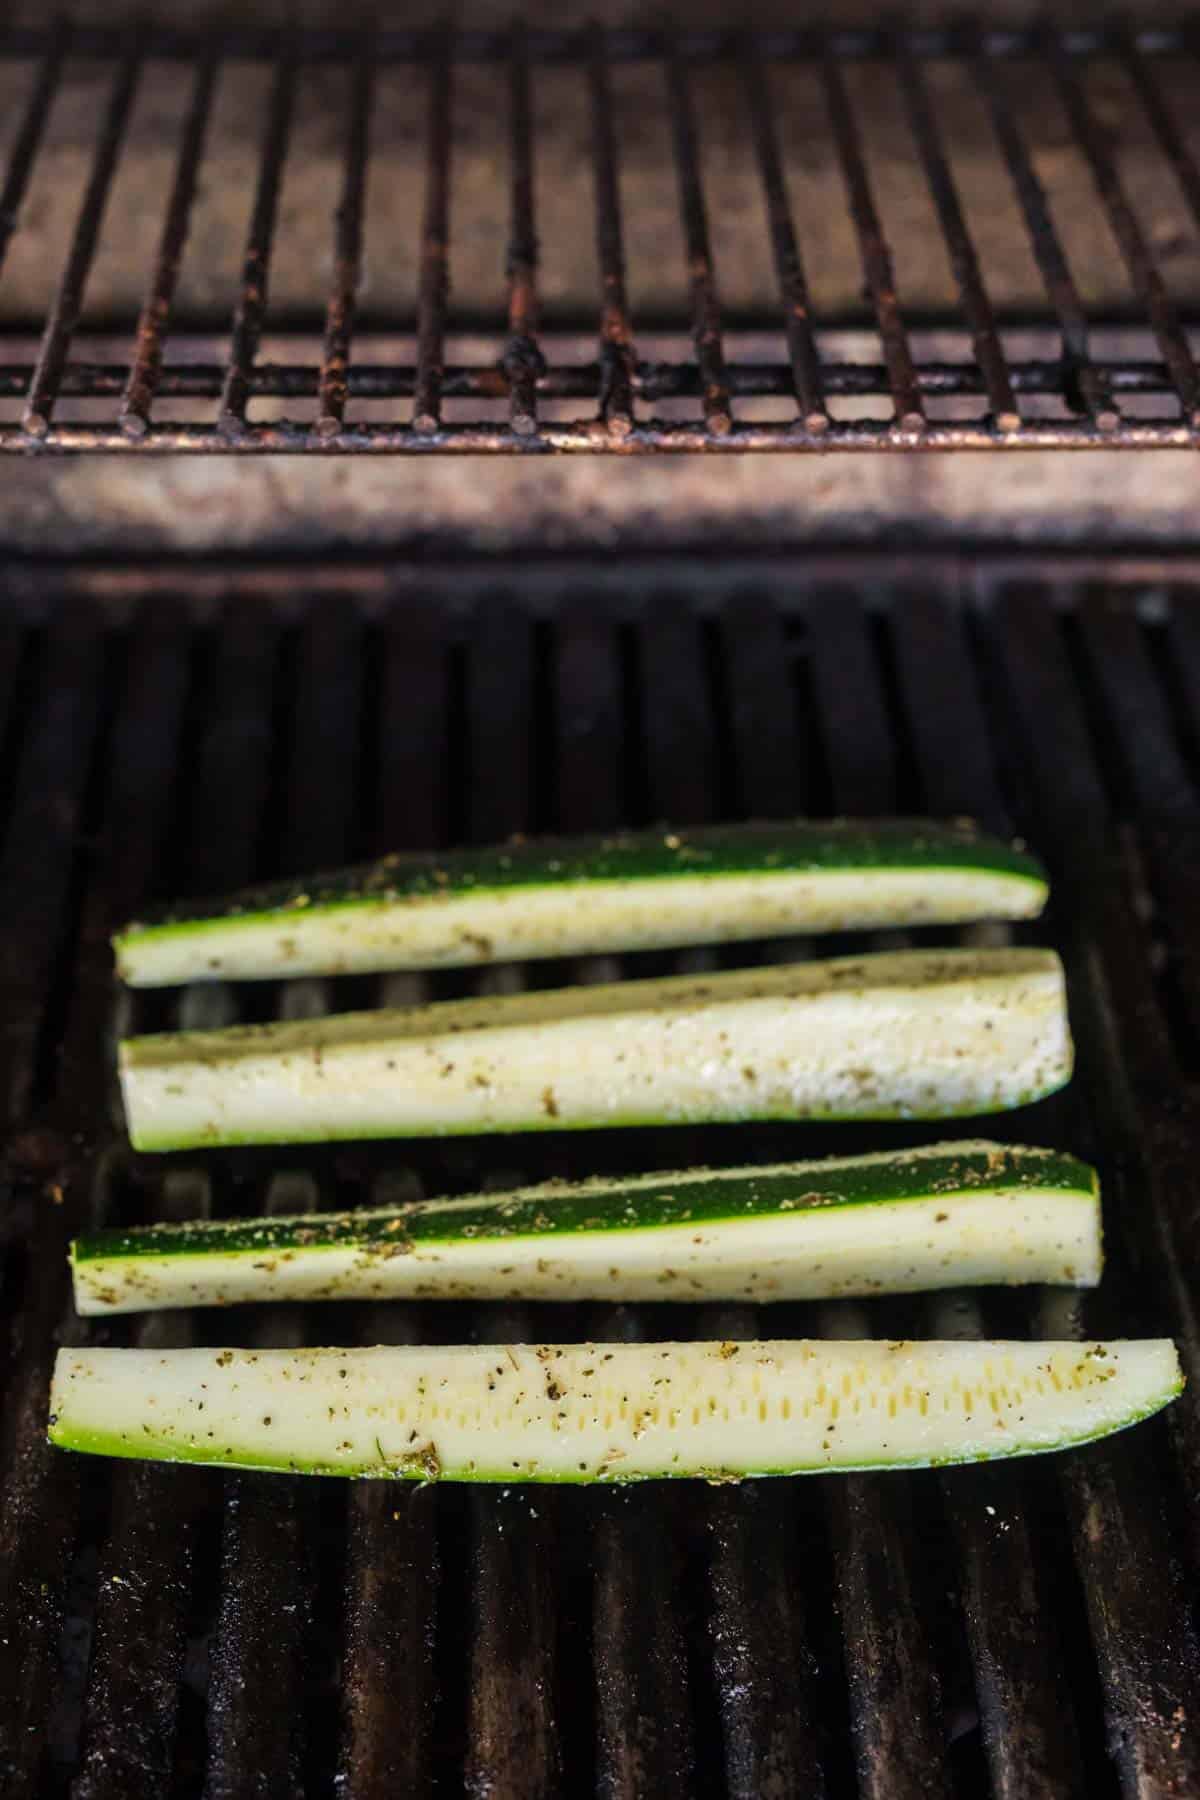 Zucchini spears placed on grill grates